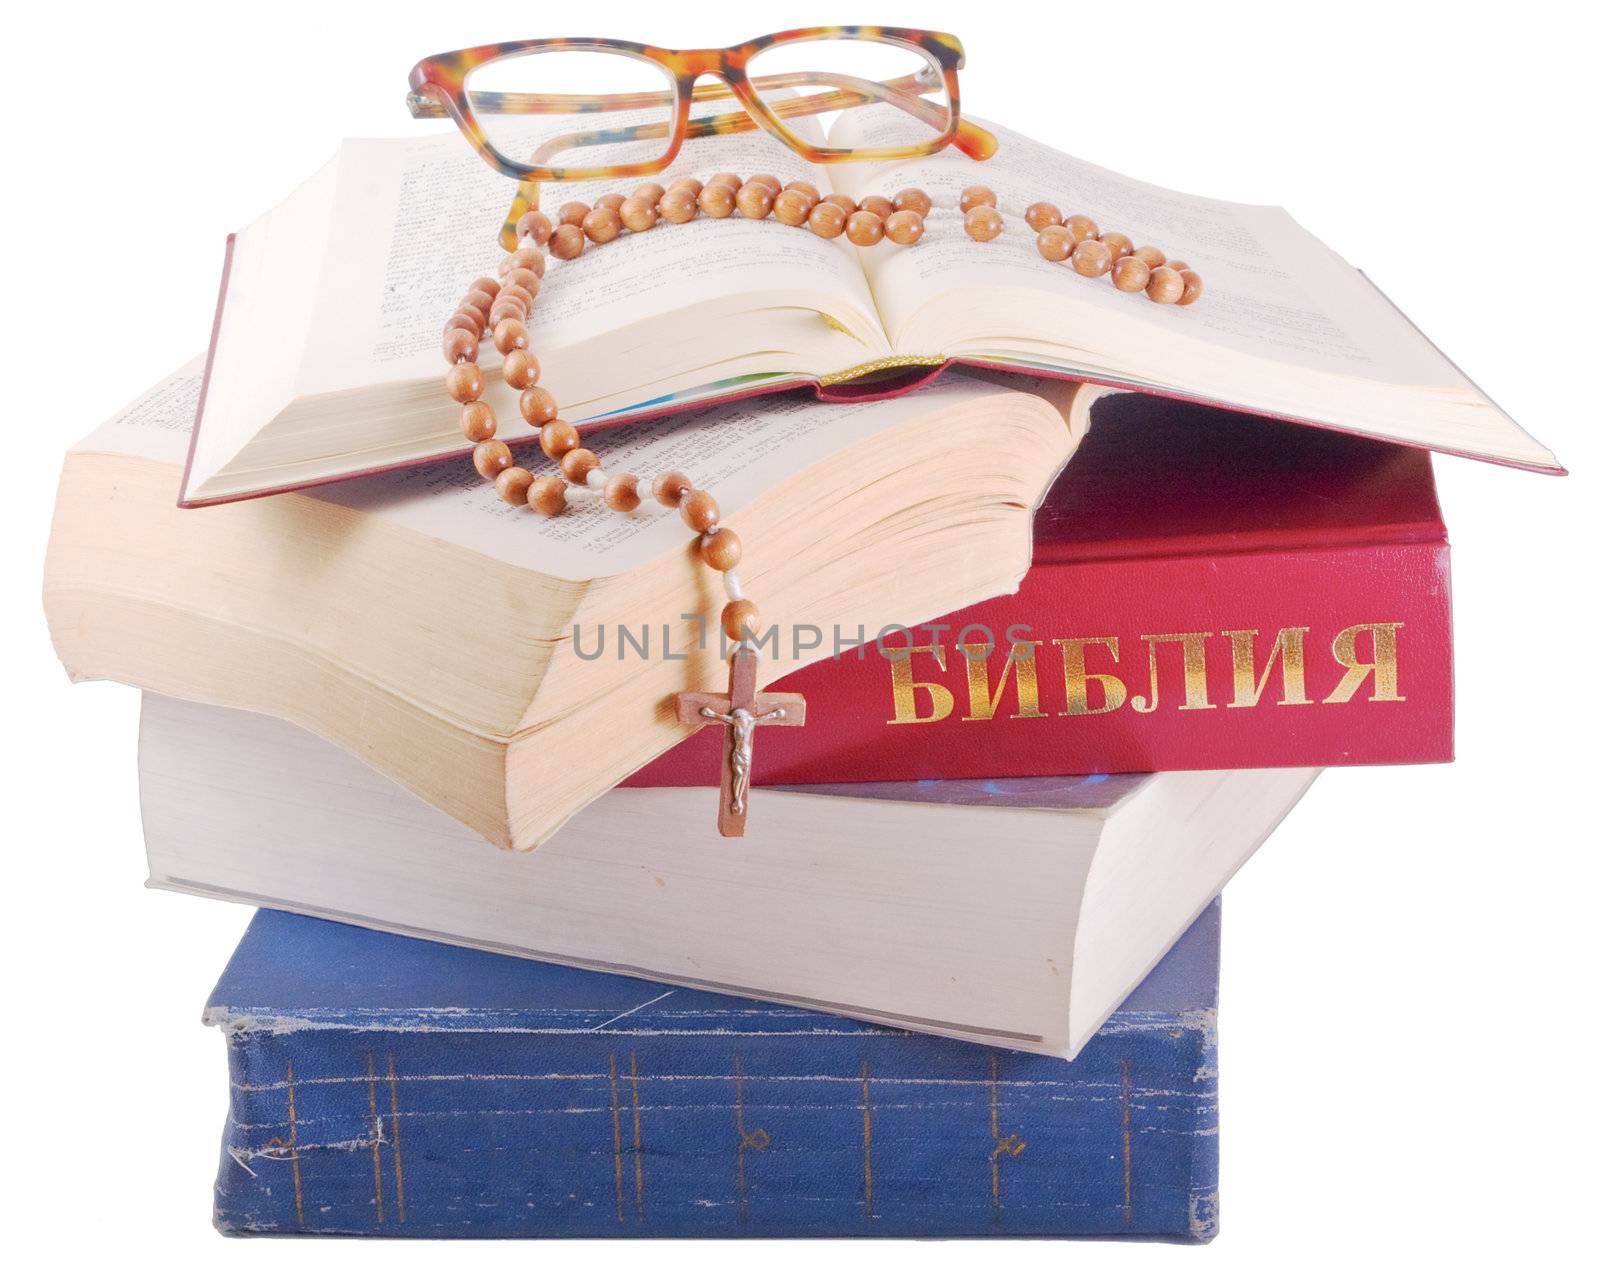 Open Holy Bible lying on stack of old books with glasses, cross and beads